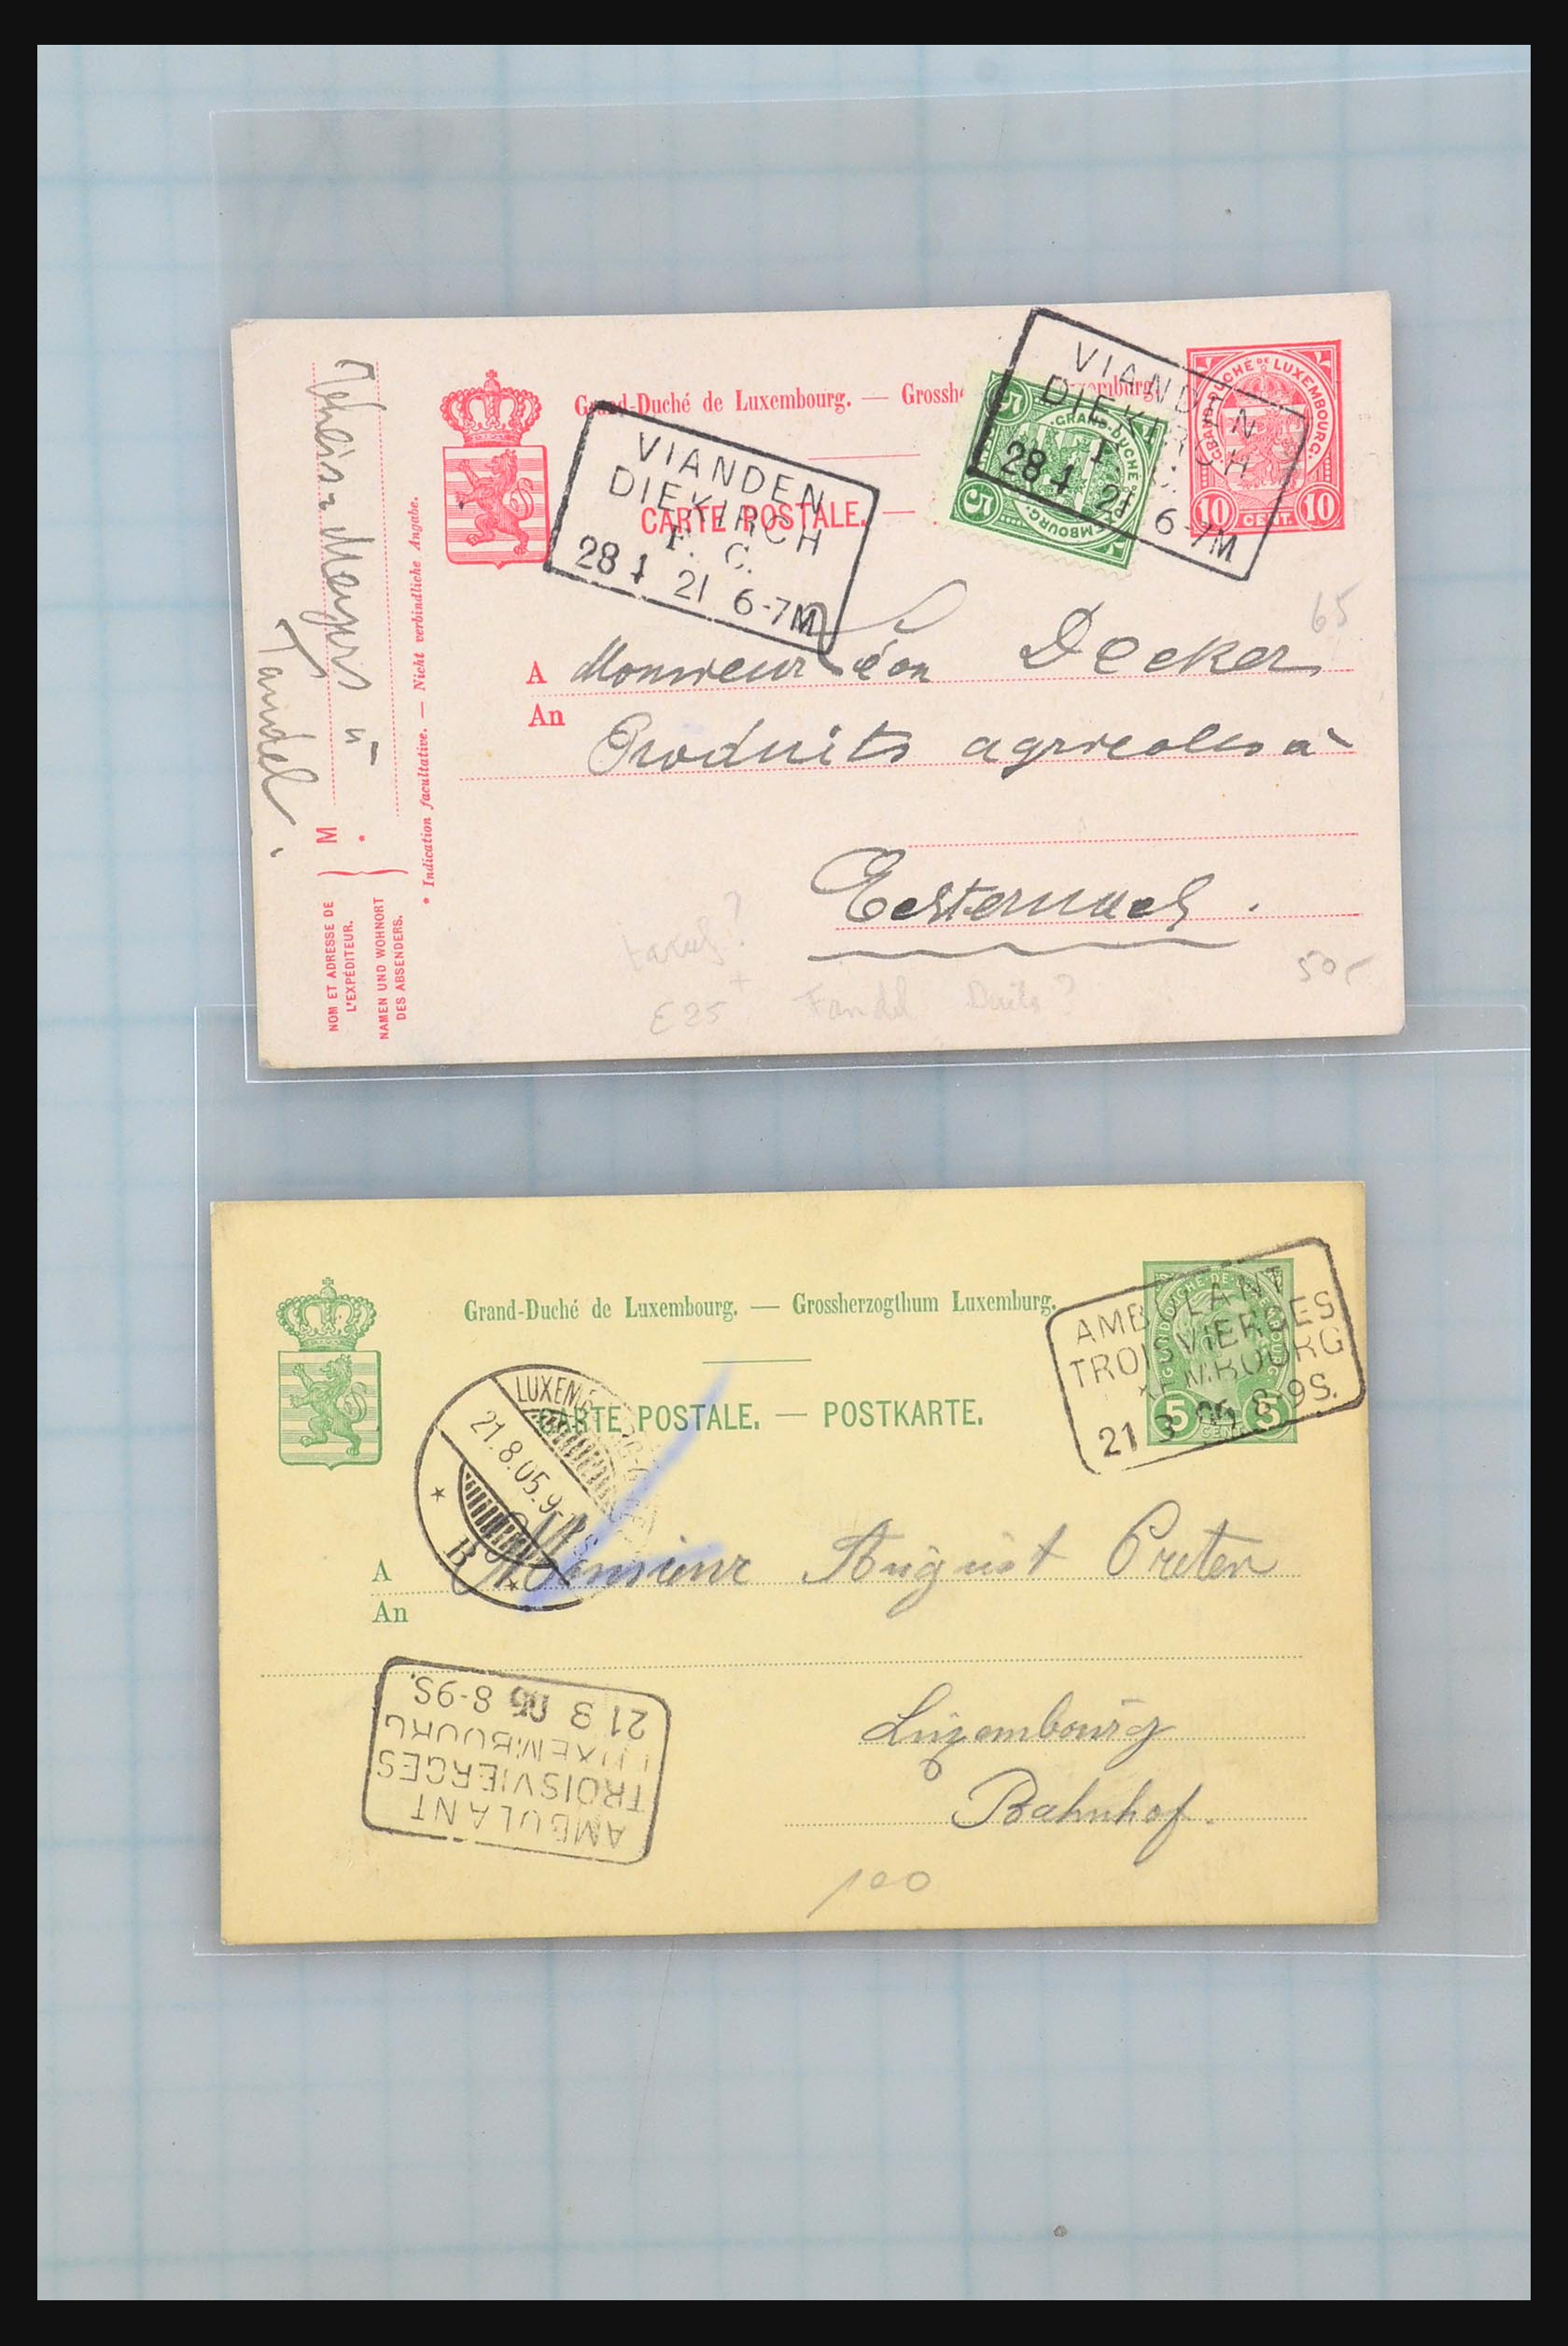 31358 051 - 31358 Portugal/Luxemburg/Greece covers 1880-1960.